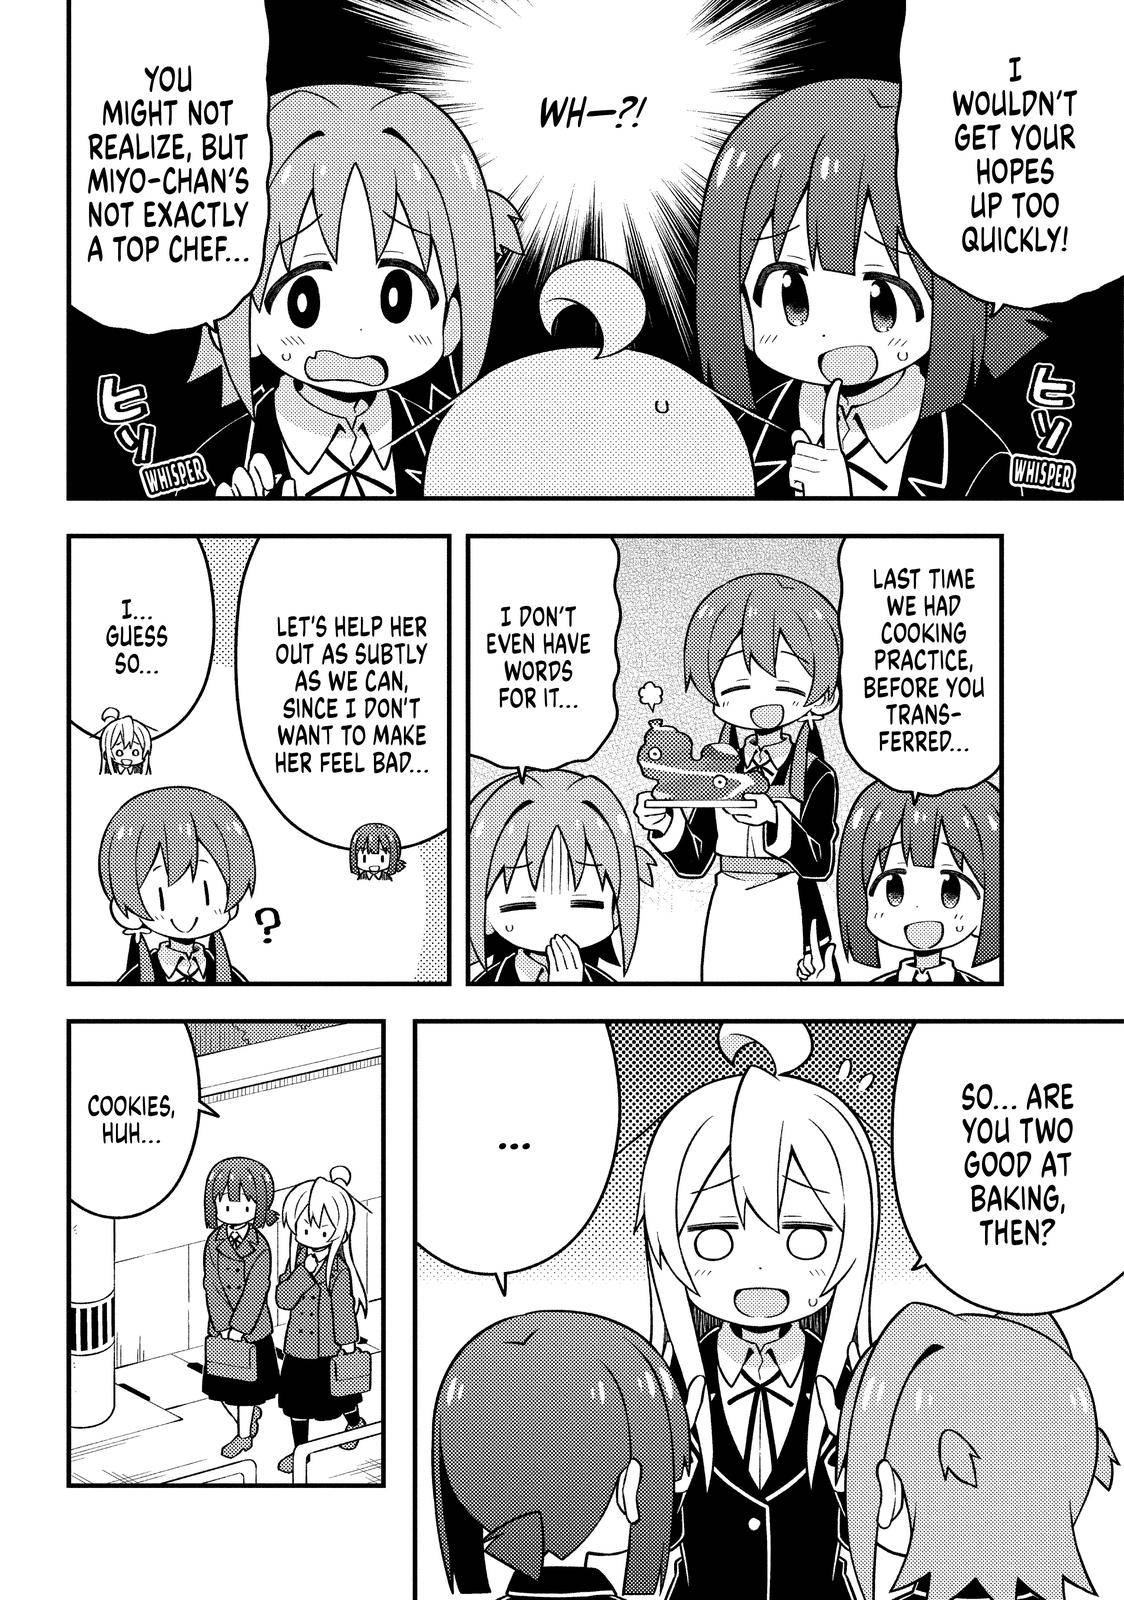 ONIMAI - I'm Now Your Sister! - chapter 26 - #4